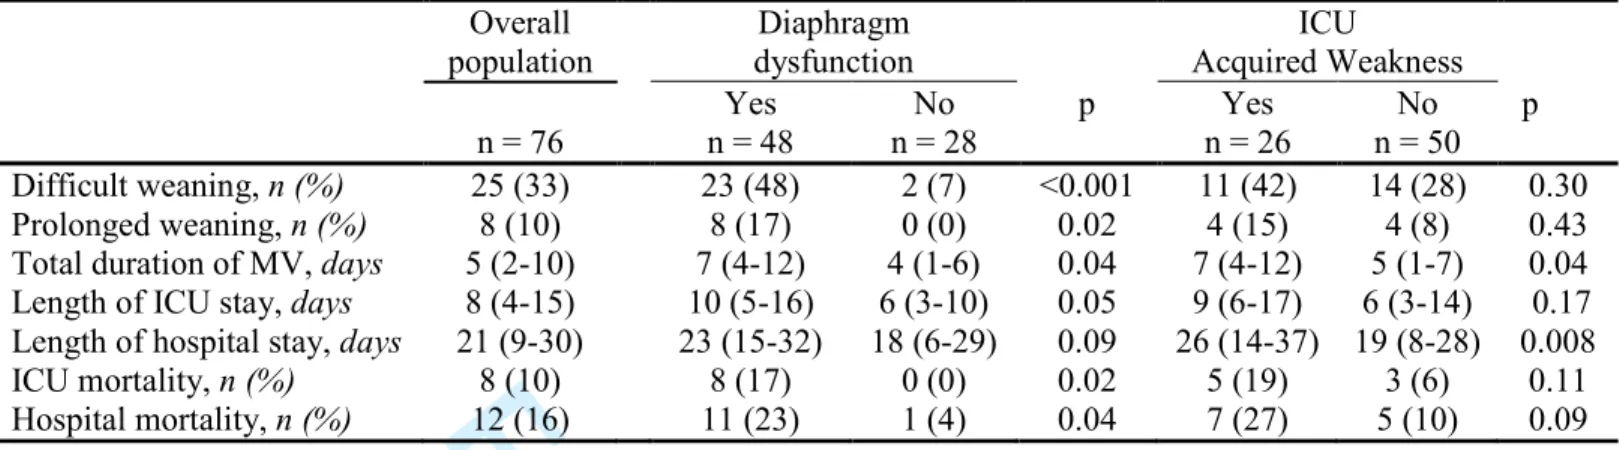 Table 4. Clinical outcome according to the presence of diaphragm dysfunction  and ICU-acquired weakness 